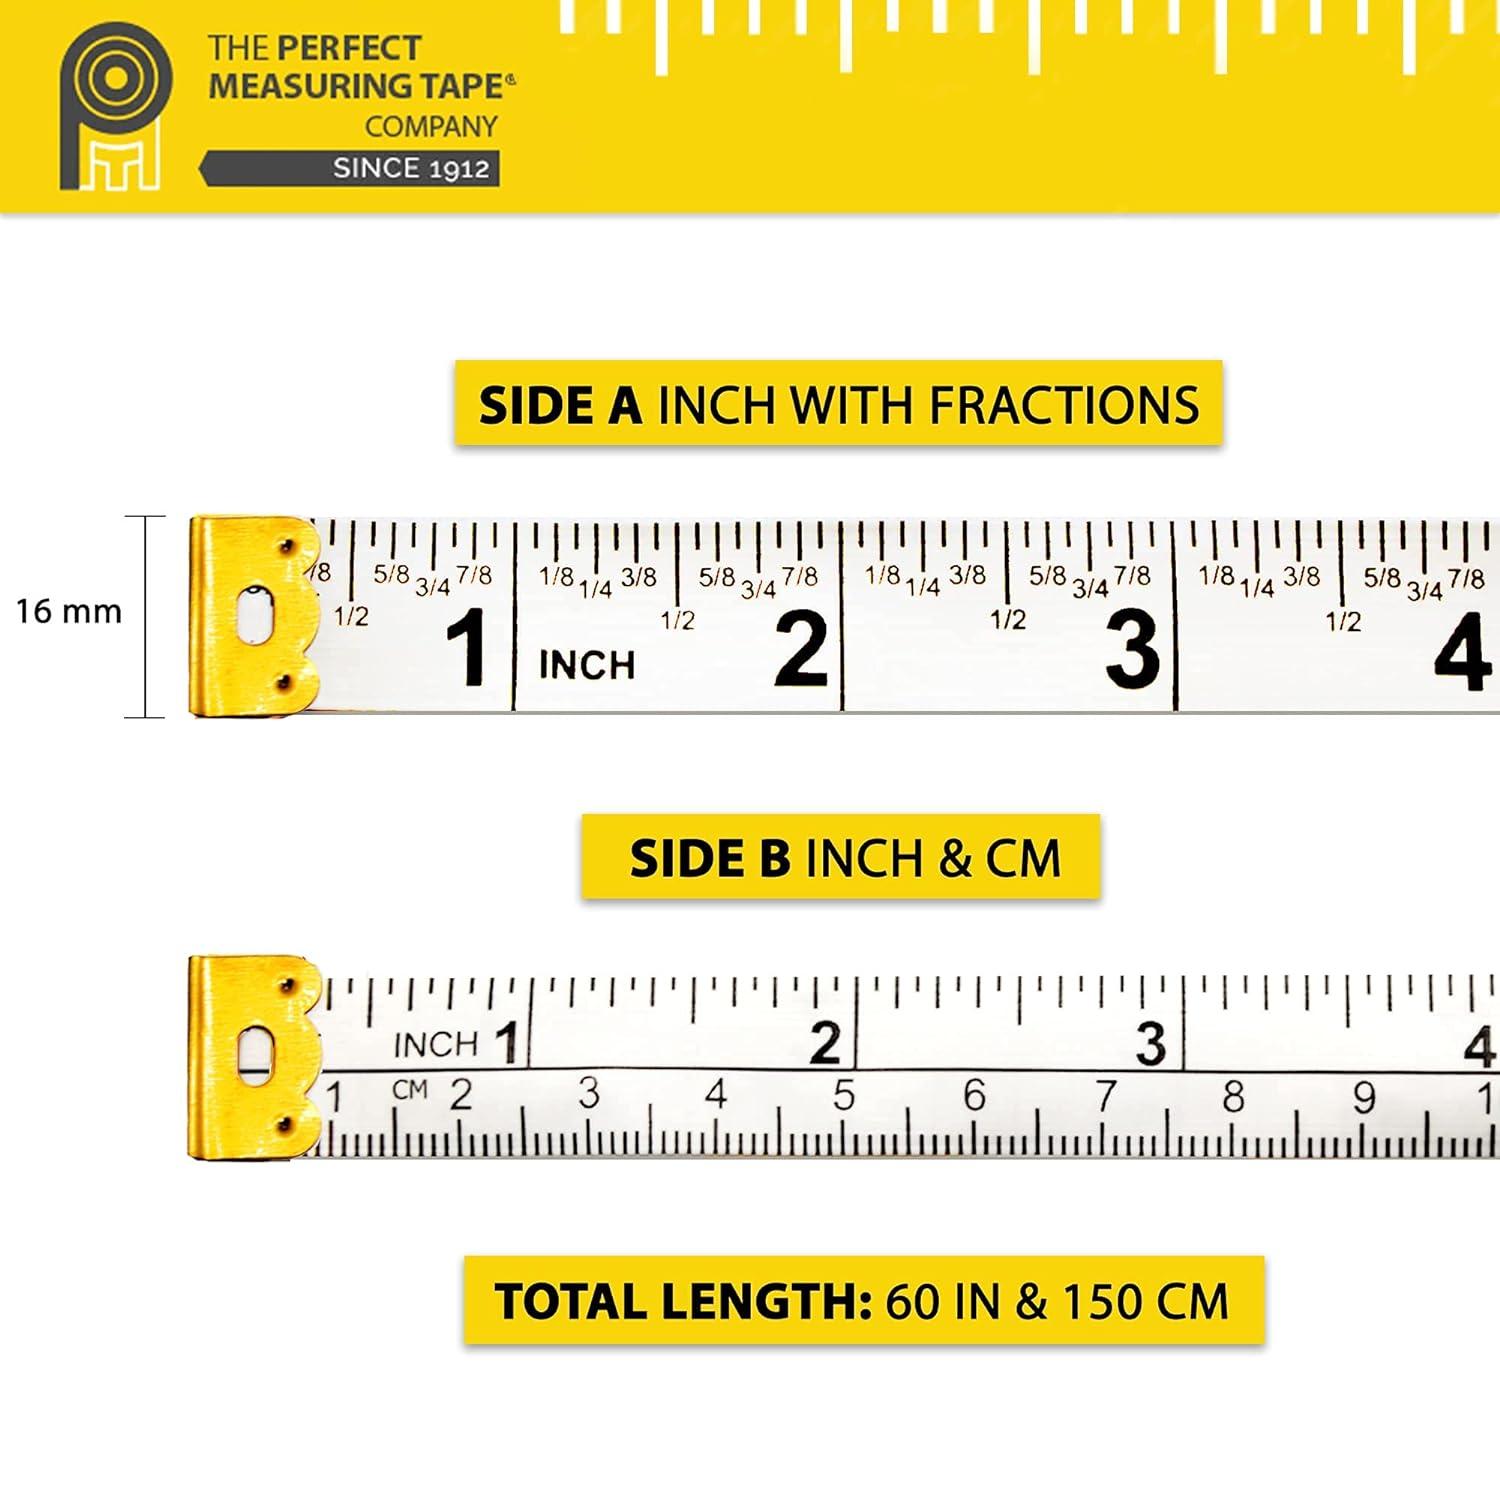 Perfect Measuring Tape- Fraction Tape Measure All-Purpose Tape Measure-Double  Sided Fractional Inches & Millimeter/Centimeter Tape Measure (10 Pack- 60in  - White) 10 Pack - 60in/1.5m White